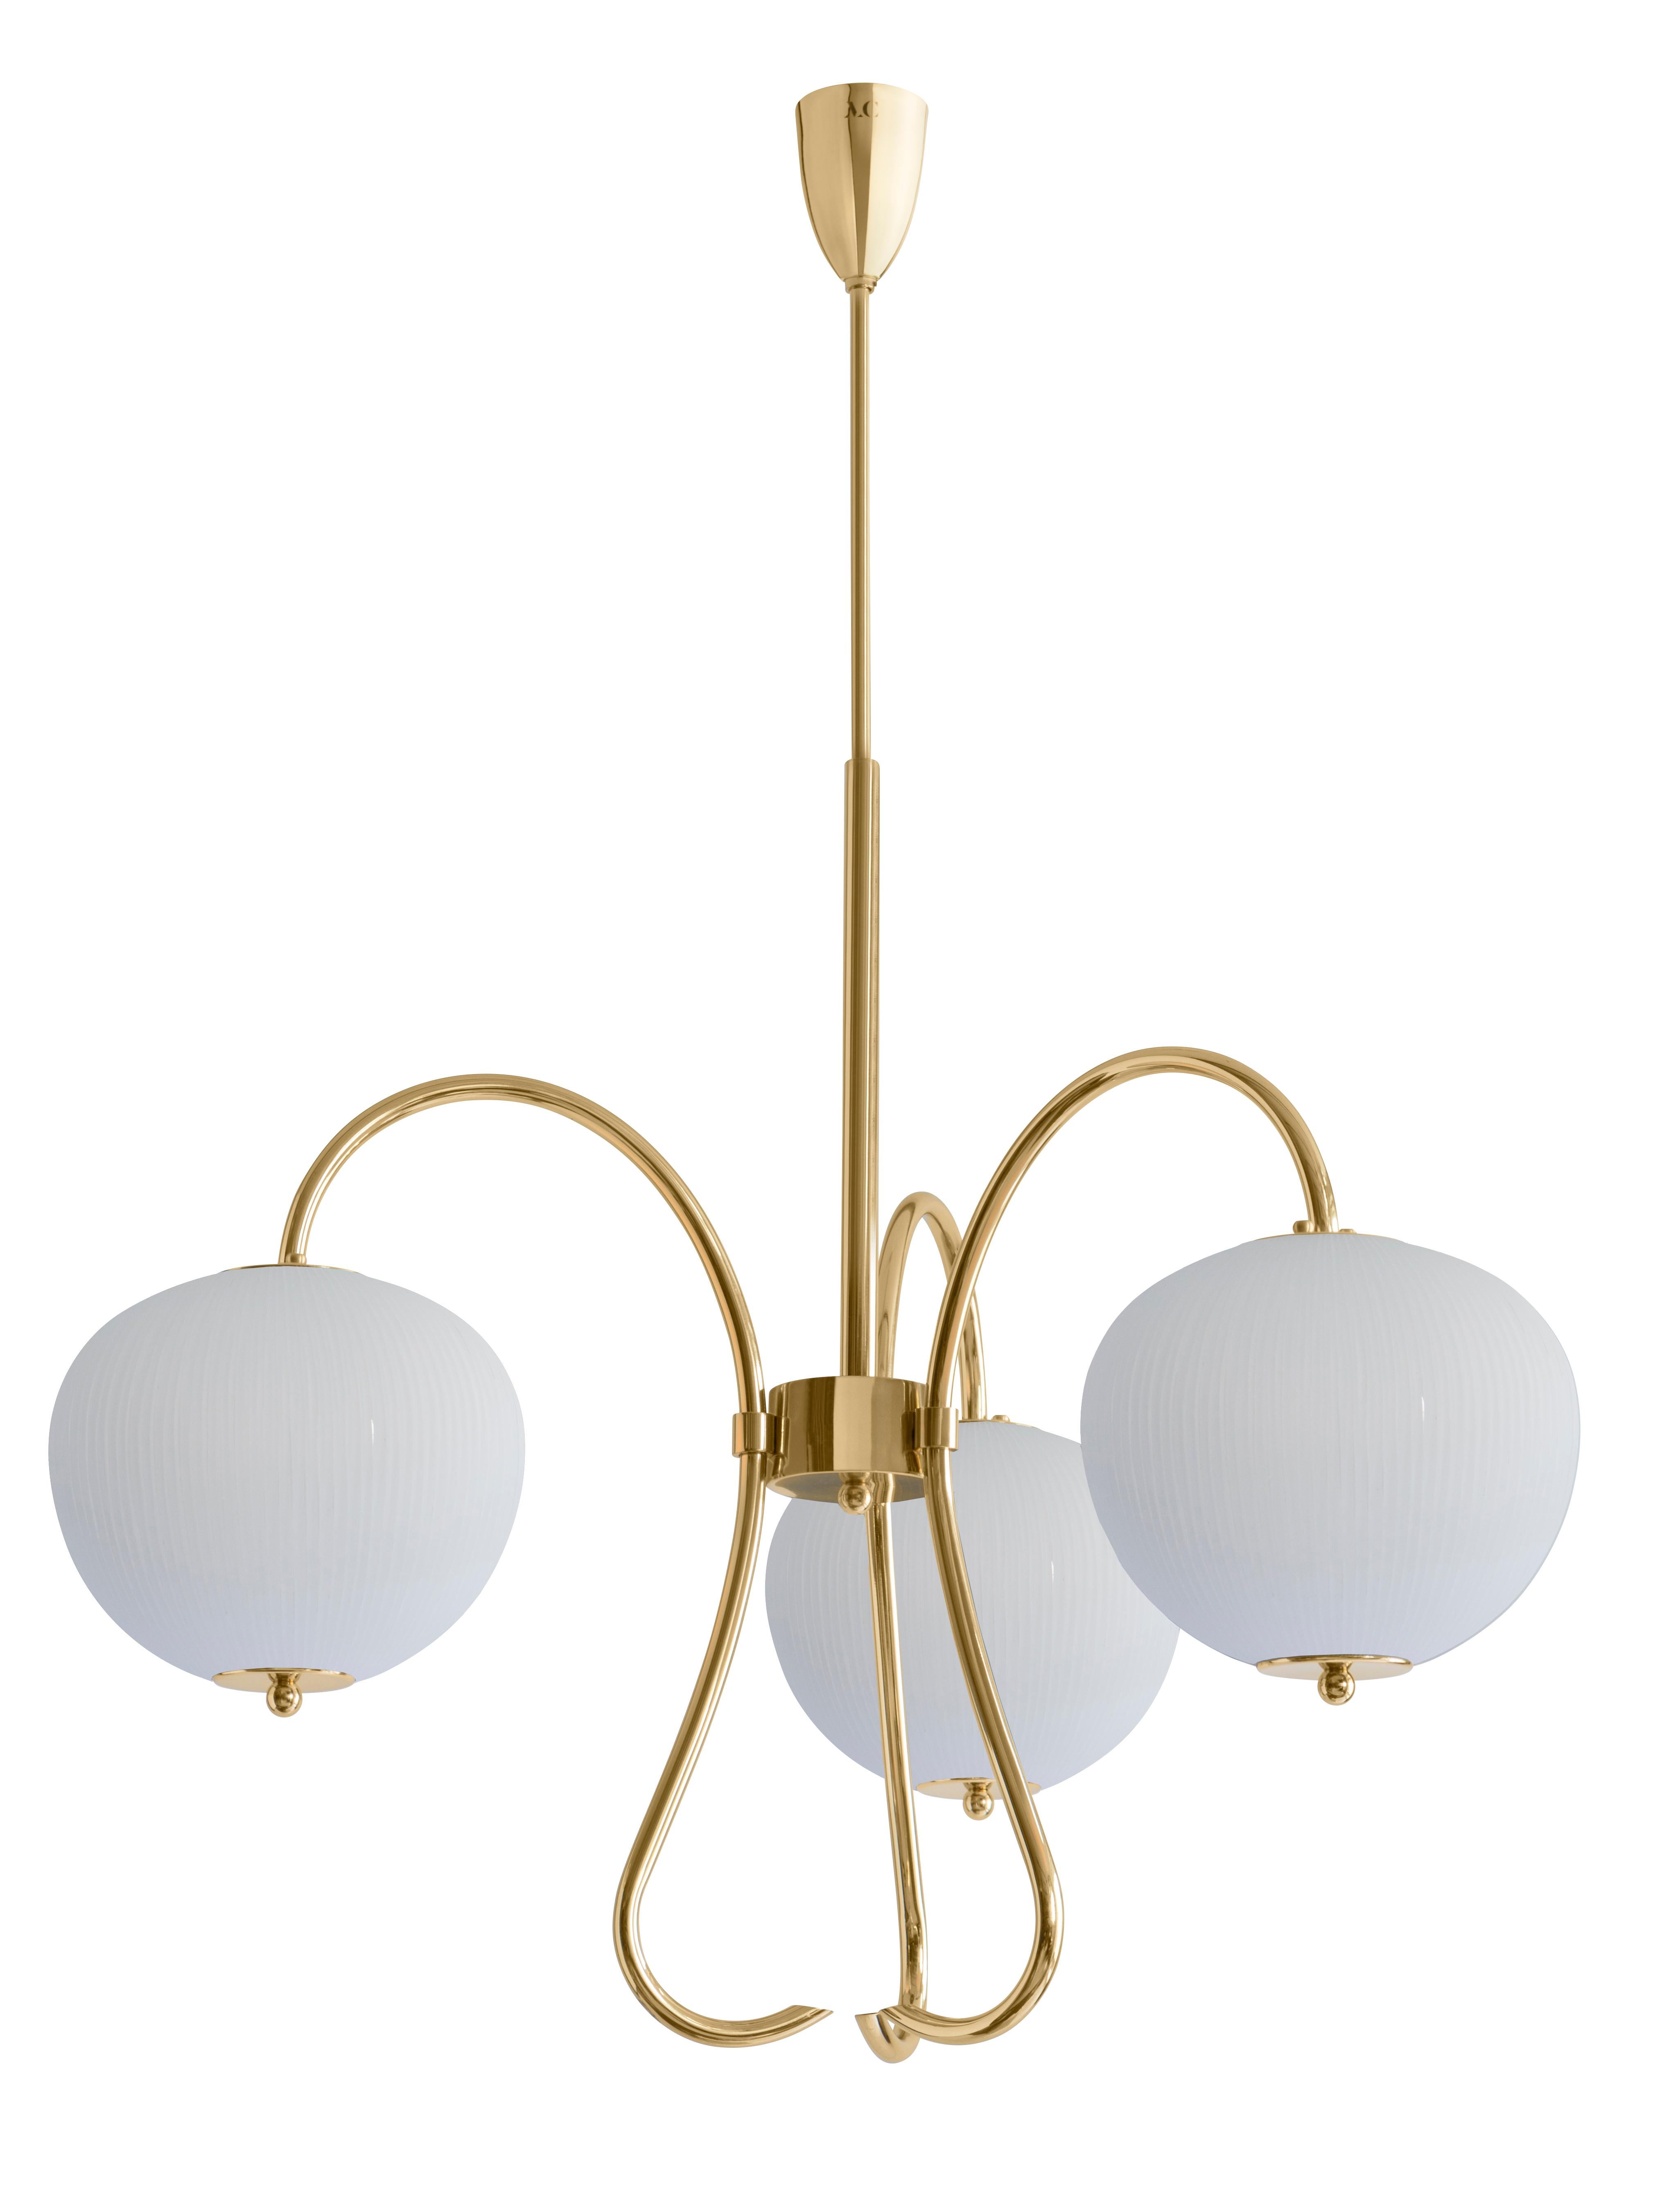 Triple chandelier china 03 by Magic Circus Editions.
Dimensions: H 120 x W 81.5 x D 26.2 cm.
Materials: brass, mouth blown glass sculpted with a diamond saw.
Colour: rich grey.

Available finishes: brass, nickel.
Available colours: enamel soft